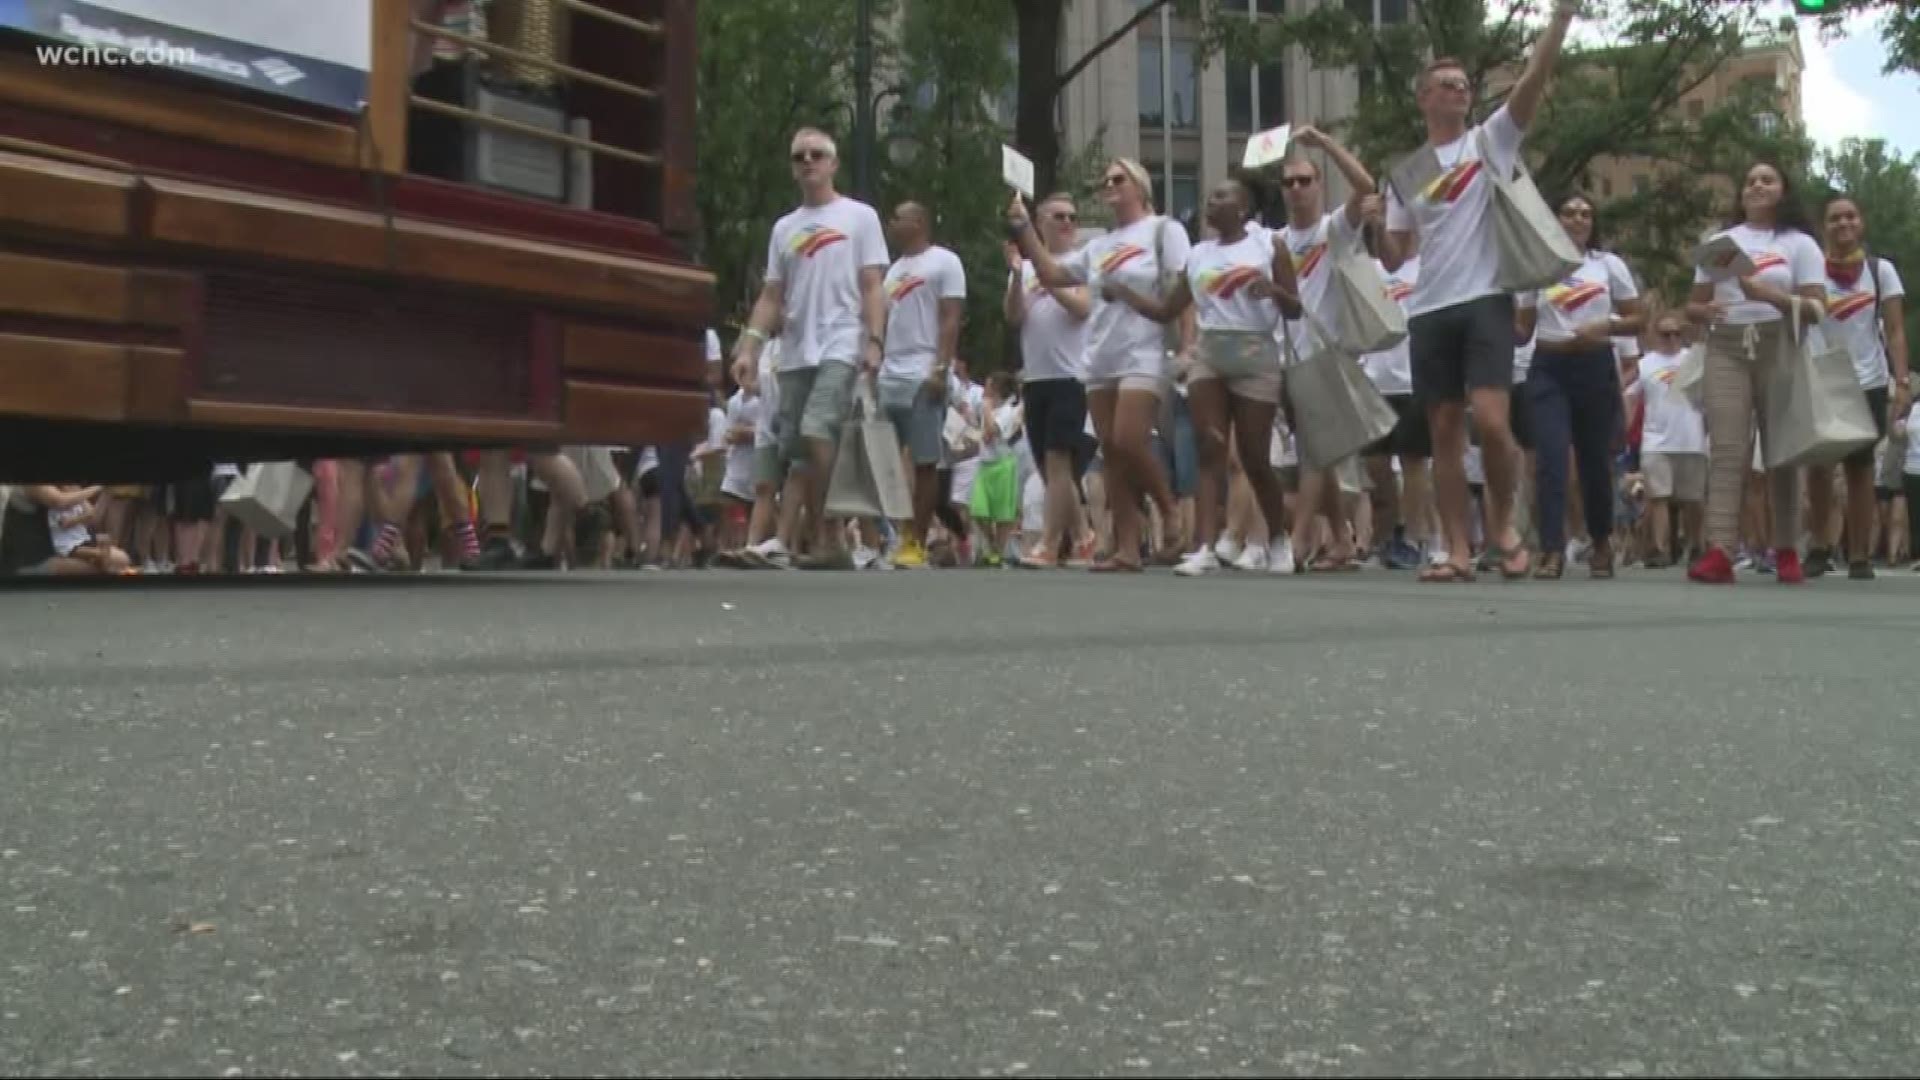 Carolinians got a chance to celebrate culture and diversity during Sunday's sixth annual Bank of America Charlotte Pride Parade. People lined the streets holding rainbow flags and celebrating the Queen City's LGBTQ communities.